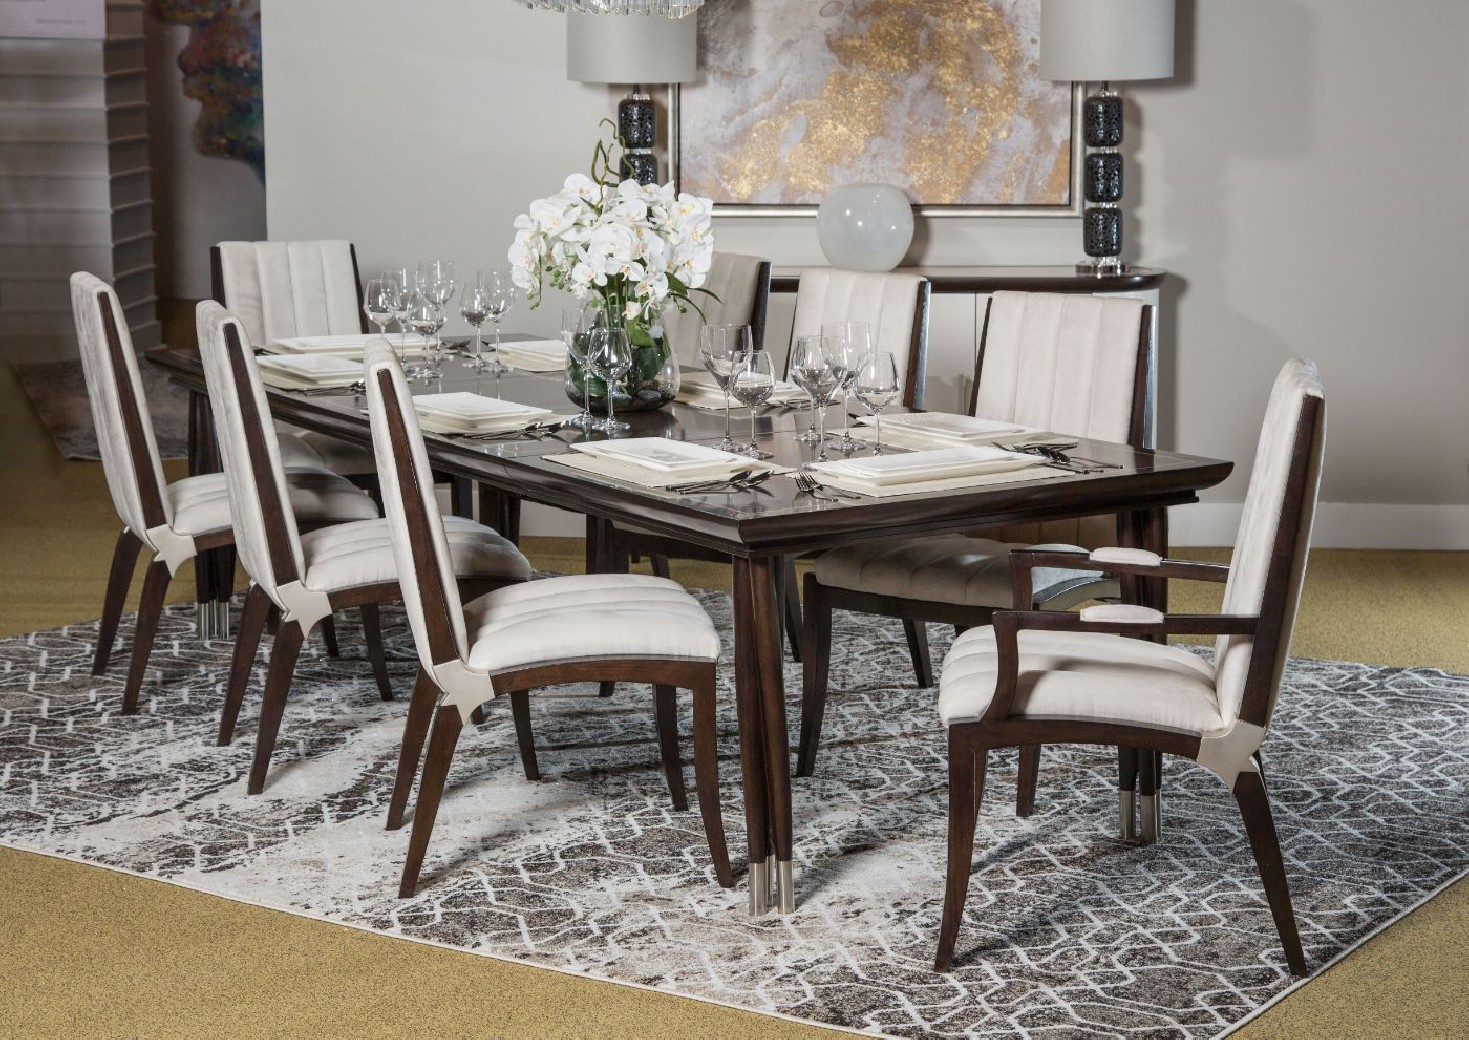 Dining Set Paris Chic Collection By, Michael Amini Dining Room Chairs